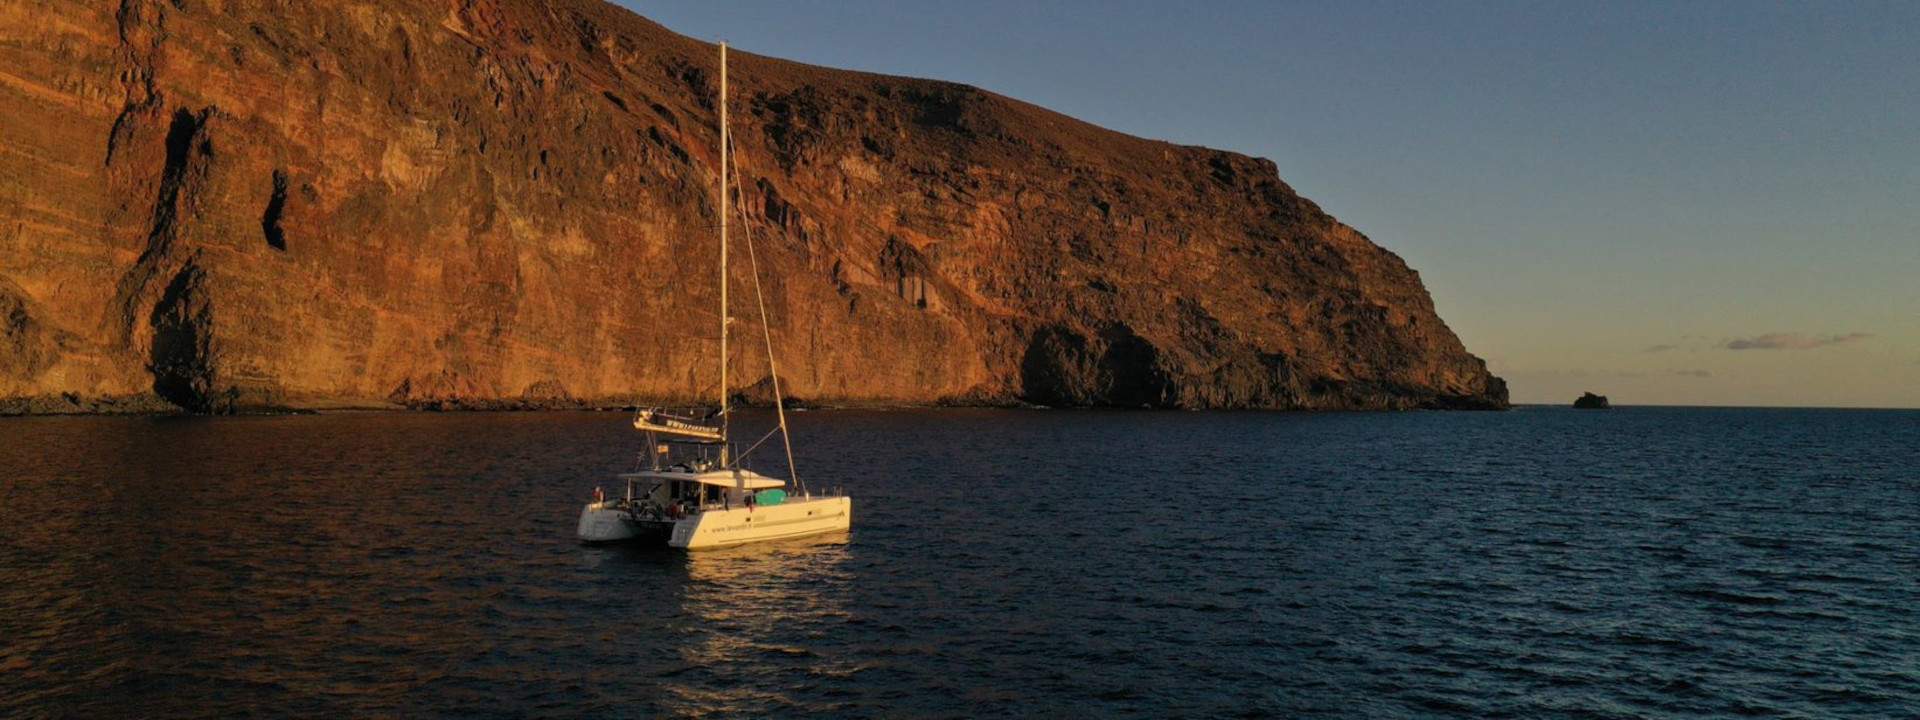 Explore the Canary Islands on board a Lagoon 450